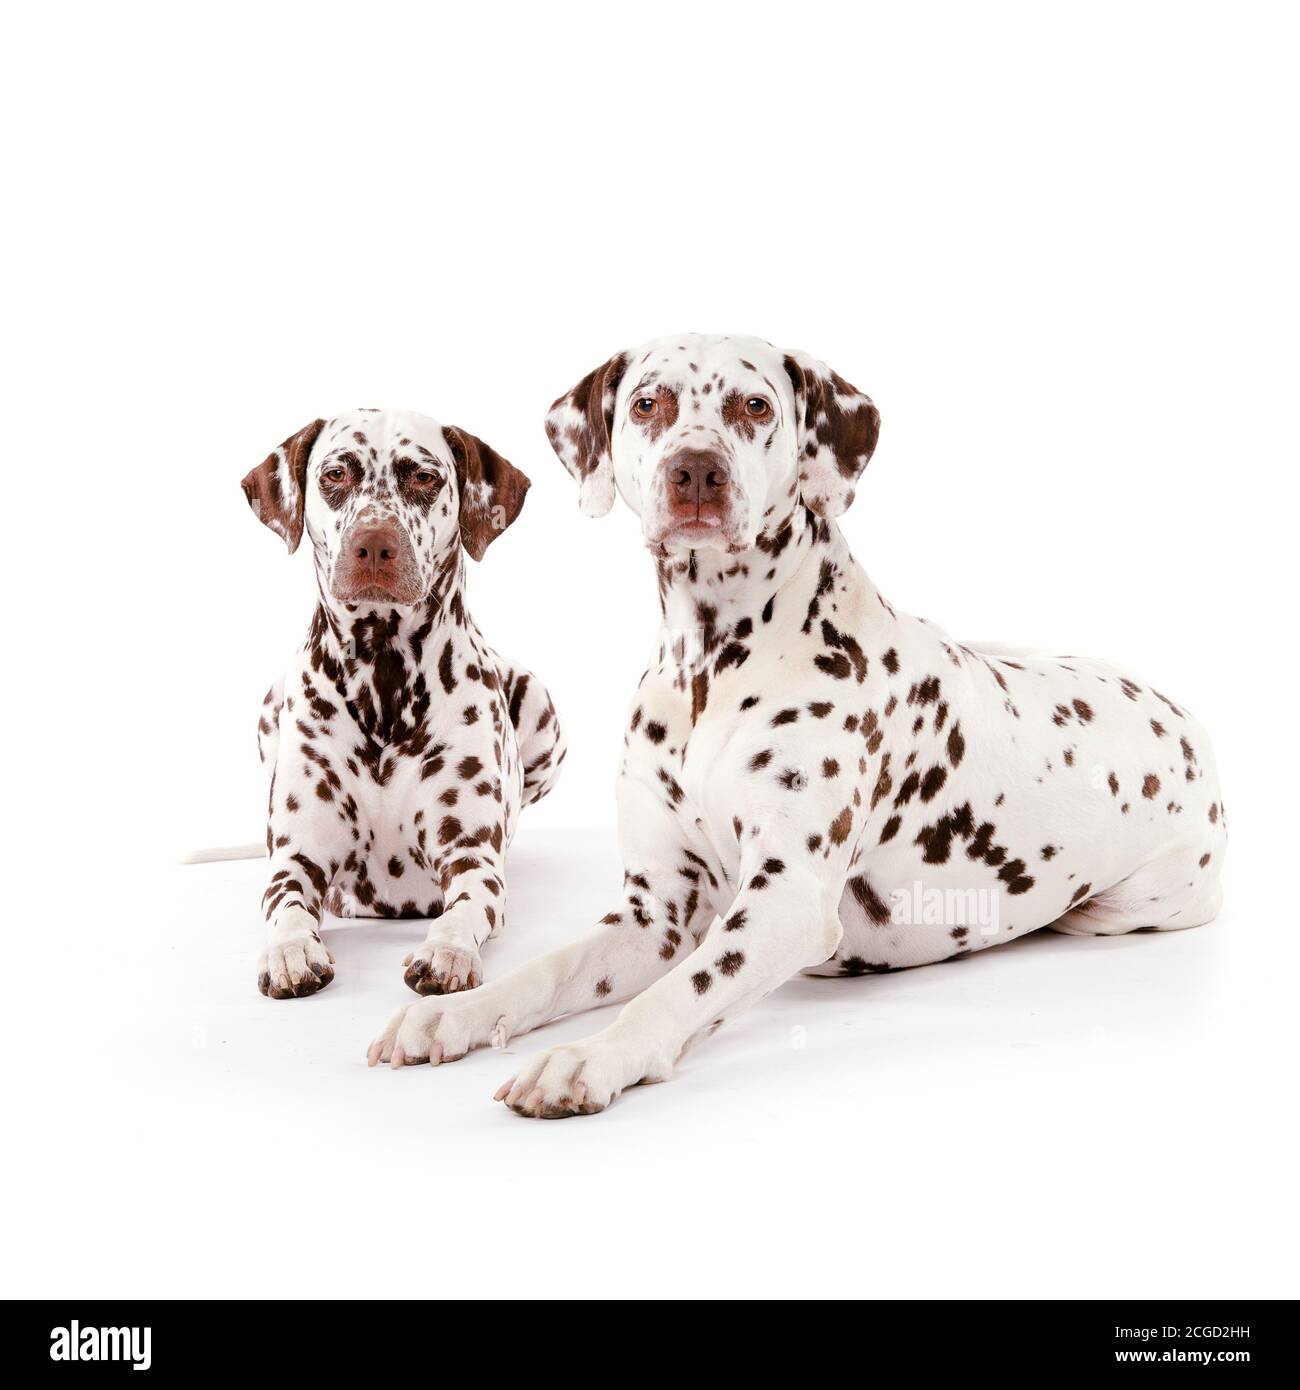 Two european dalmatians with white coat marked with black and liver-colored spots, lying on white seamless background Stock Photo